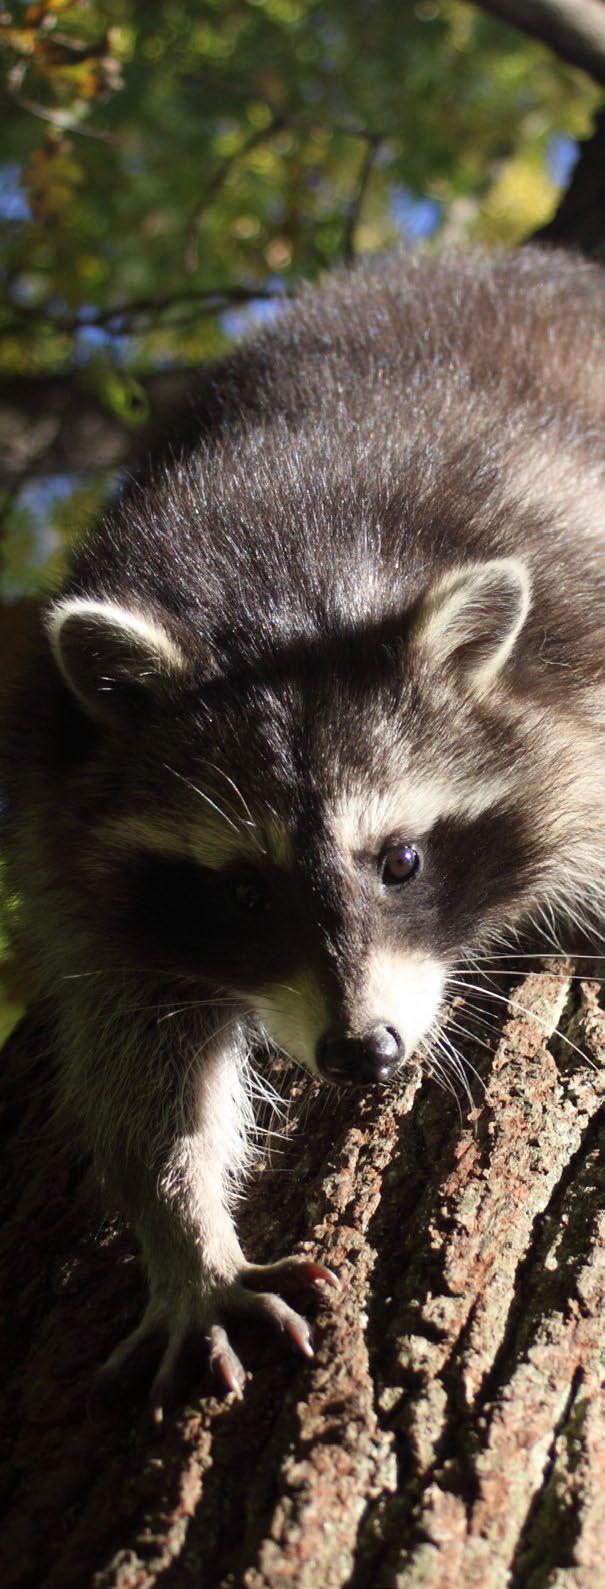 Raccoon harvest was high in 2012 and 2013, when pelt prices were higher, and declined in 2014-2017 along with the market. In April of 2018 record amounts of snowfall covered much of the state.